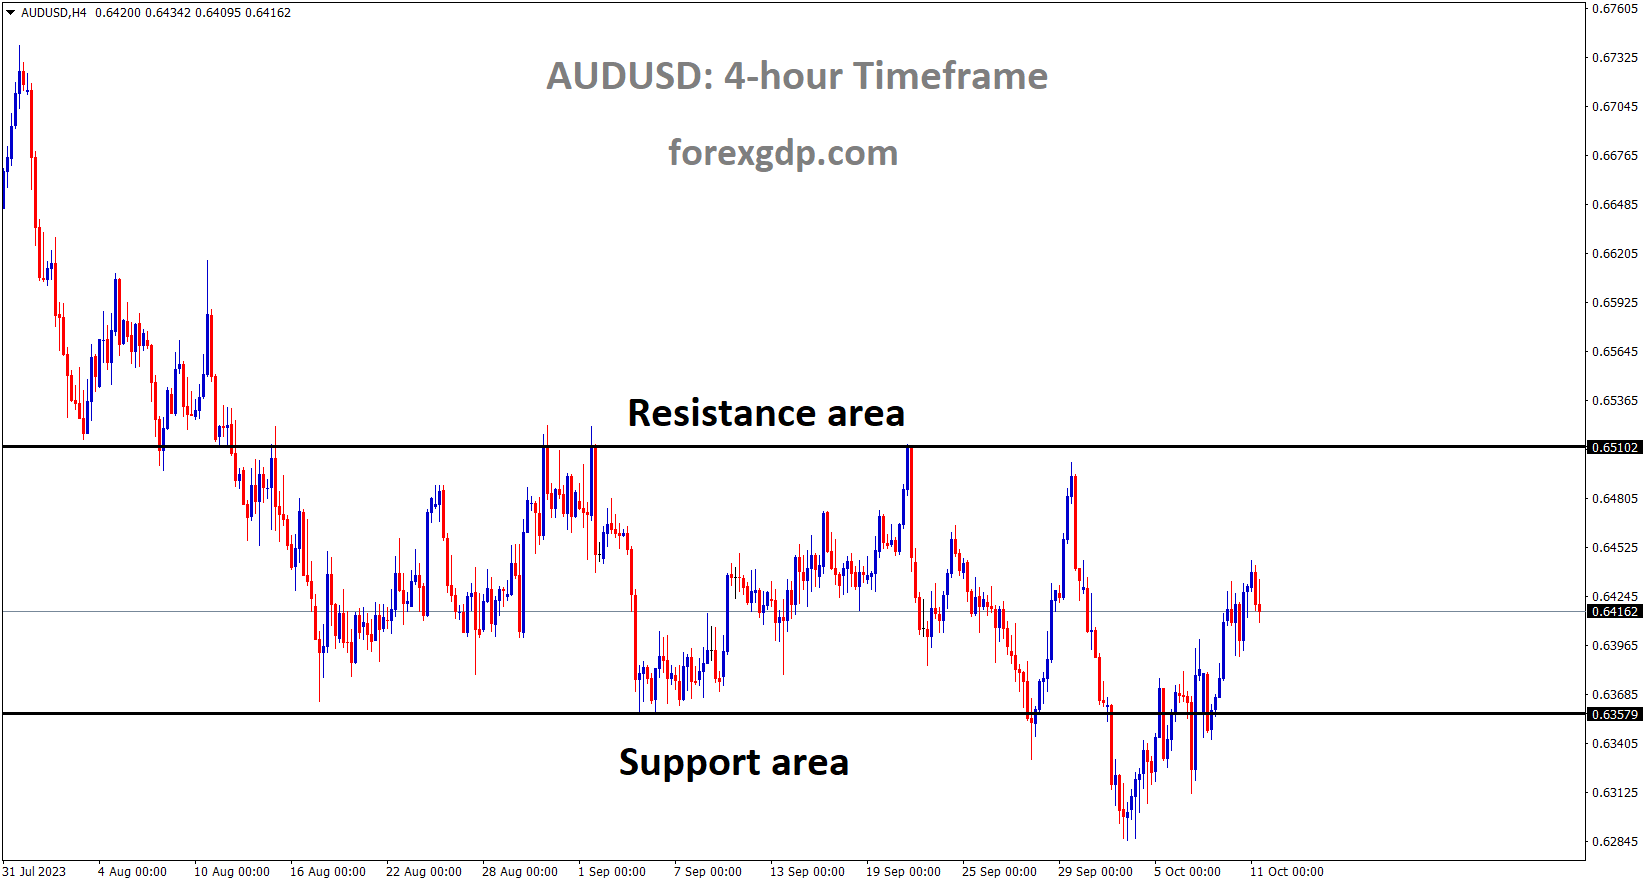 AUDUSD is moving in the Box pattern and the market has rebounded from the support area of the pattern